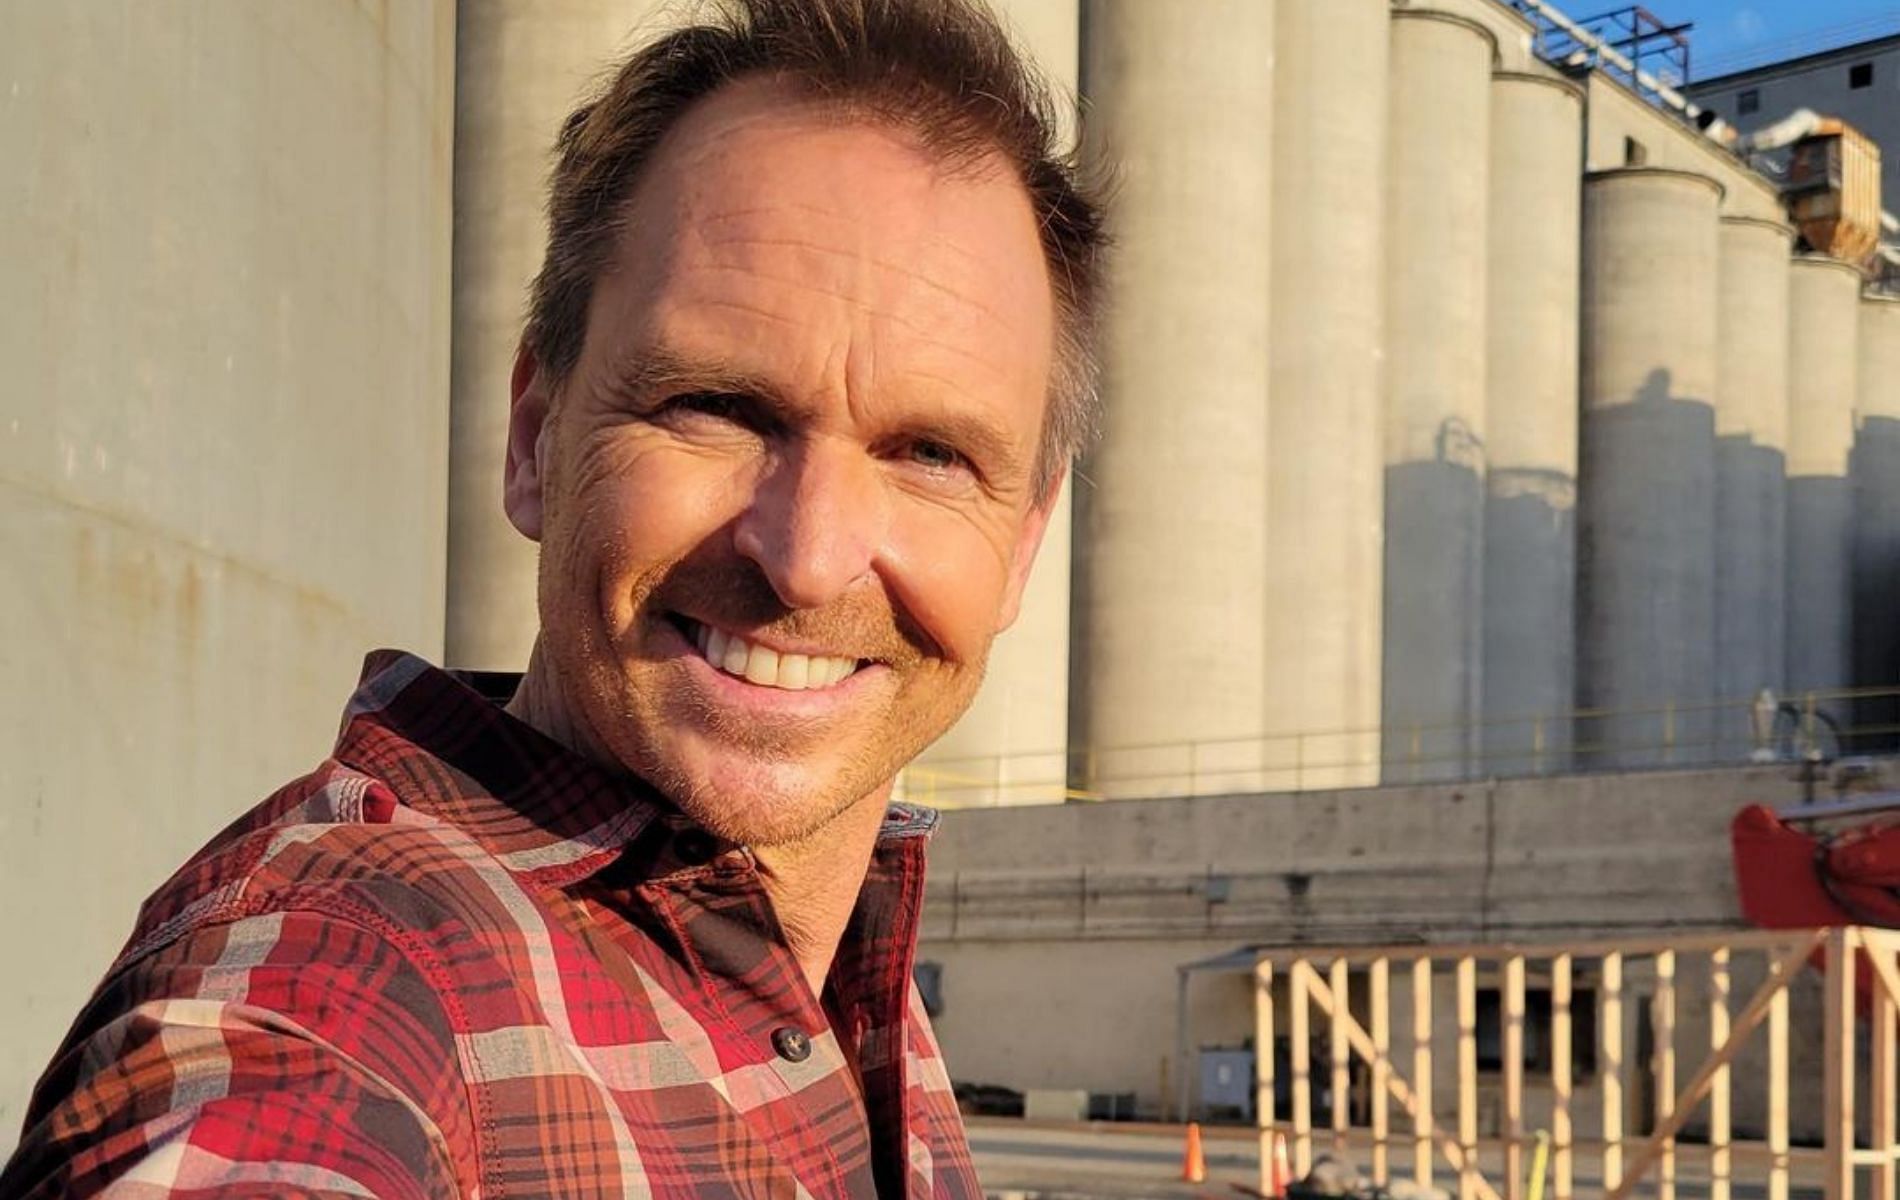 &lsquo;The Amazing Race&rsquo; host Phil Keoghan (Image via philiminator/ Instagram)